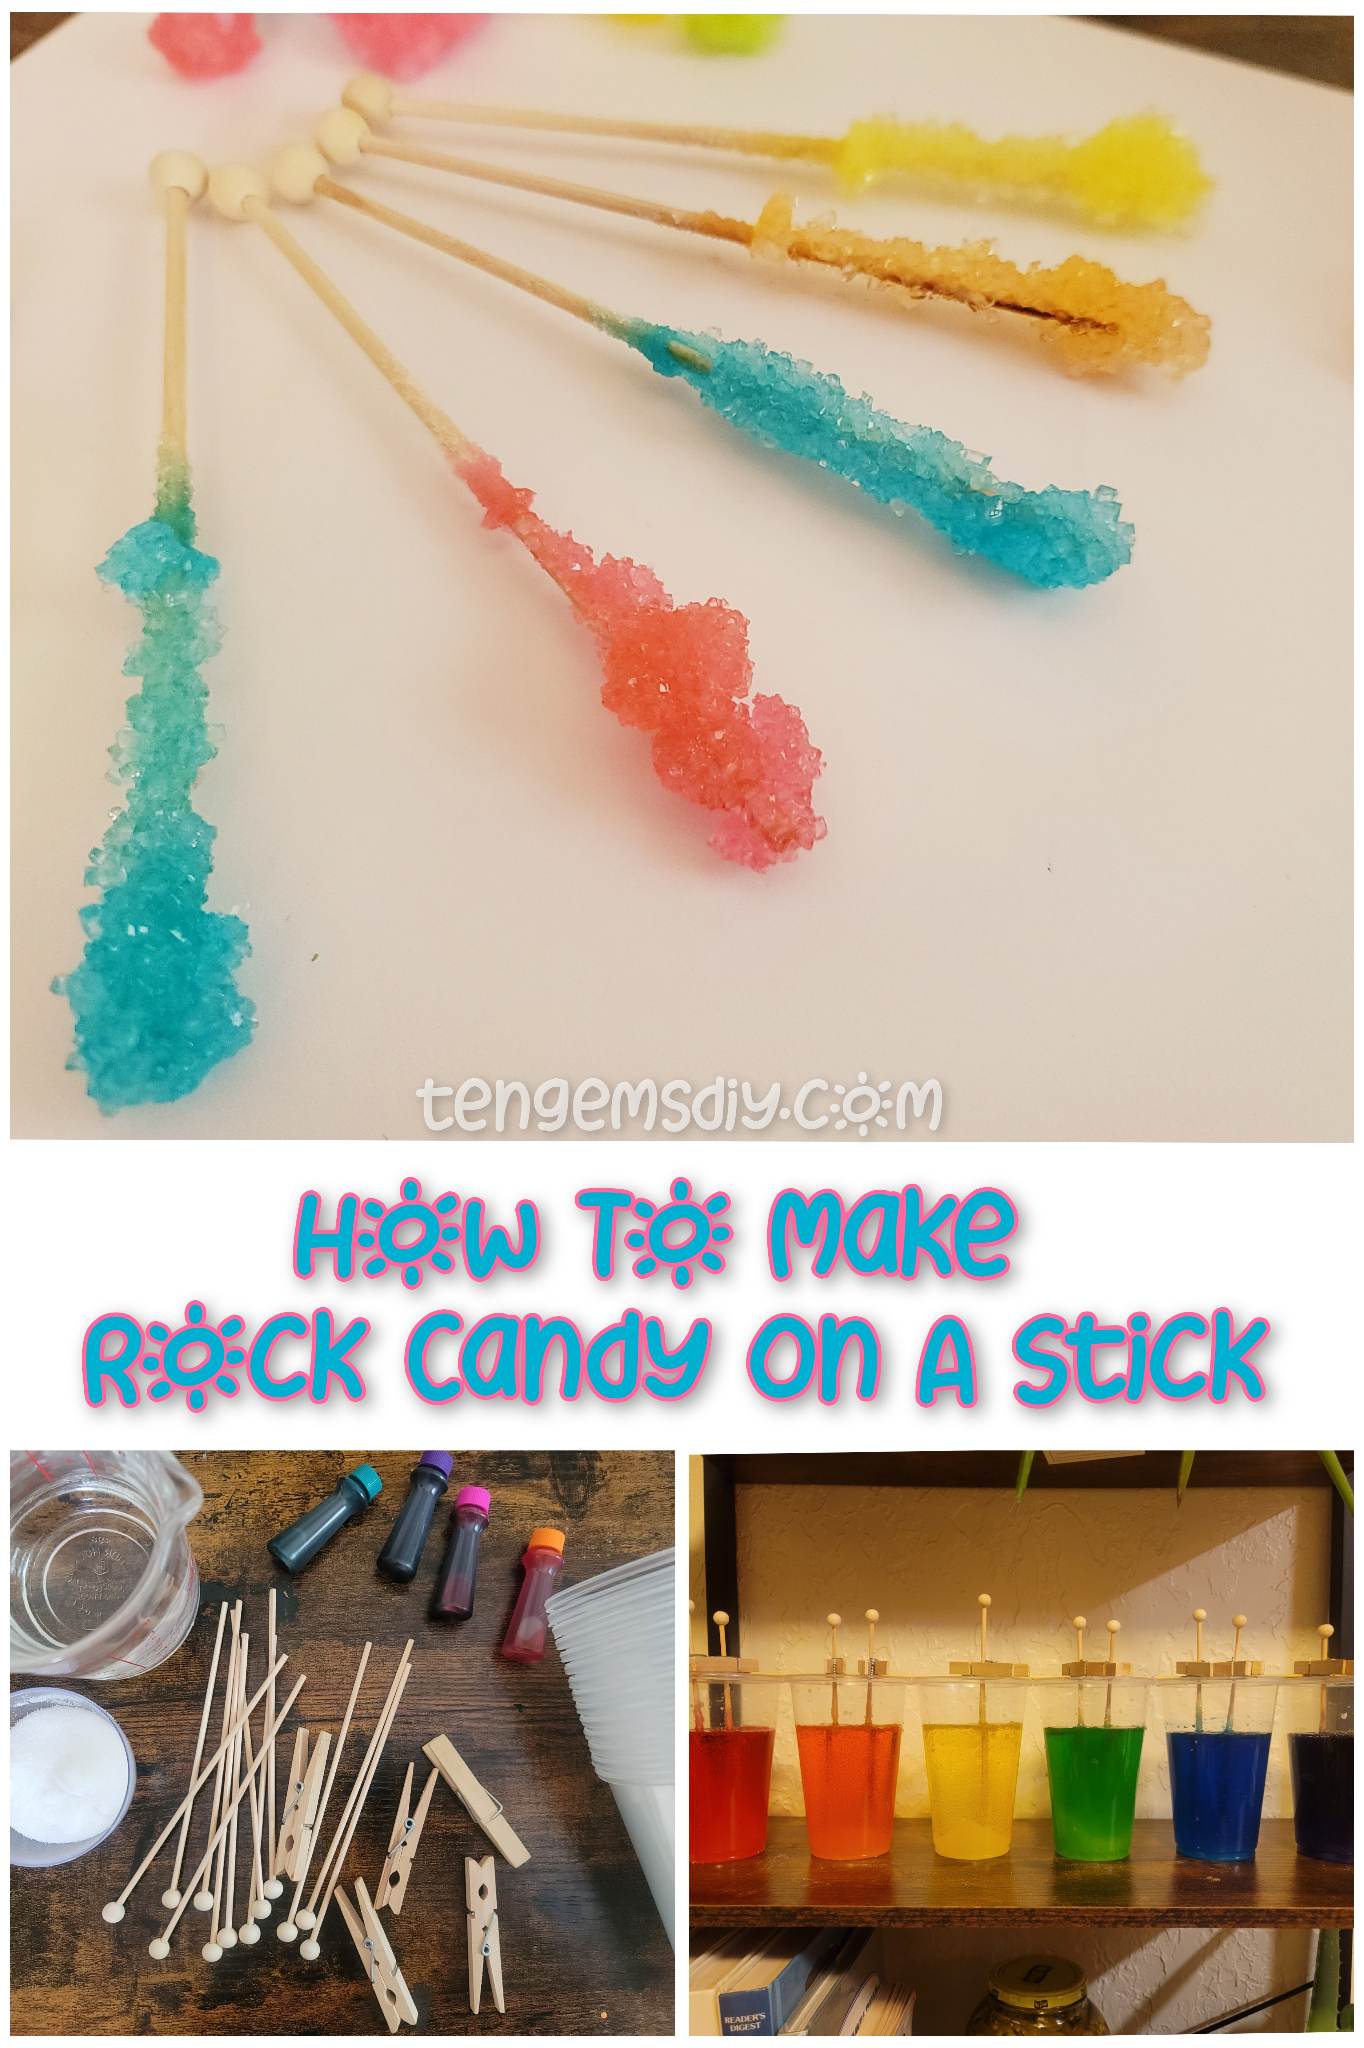 How to make rock candy, how to make old fashioned rock candy, how to make sugar candy, rock candy recipe, rock candy science experiment, rock candy sticks, how to make hoomemade candy, how do they make rock candy, diy rock candy, rock candy crystal sticks, trending crafts, cooking for kids and adults, how long does it take rock candy to grow, easy candy recipes, edible gifts, edible kids crafts, fun foods to make, foods to make a sell, kids candy bar, candy party ideas, edible craft ideas, edible kids projects, kitchen experiments for kids, fun experiments for kids, colorful candy diy, how to make candy, mason jar experiments, what to do with a mason jar, easy candy recipe,